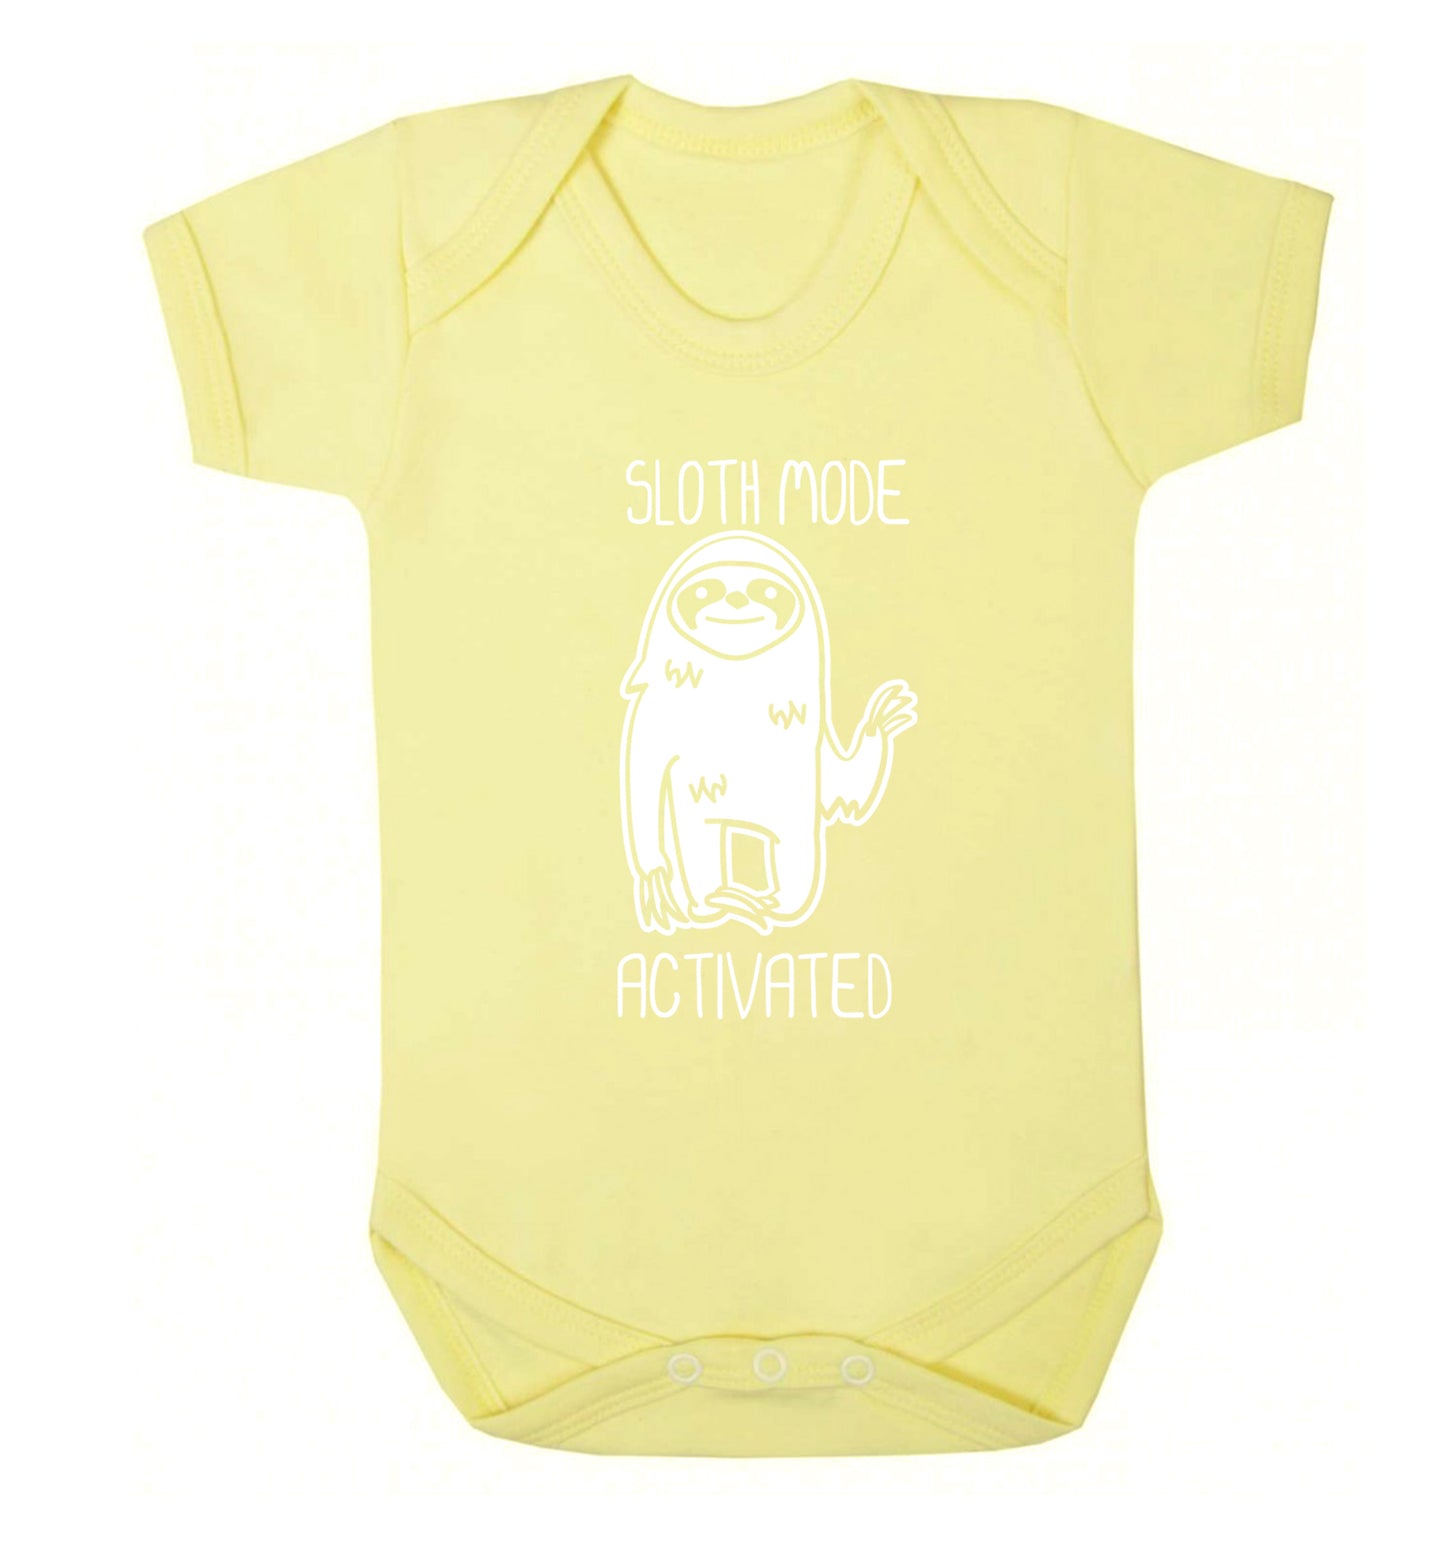 Sloth mode acitvated Baby Vest pale yellow 18-24 months